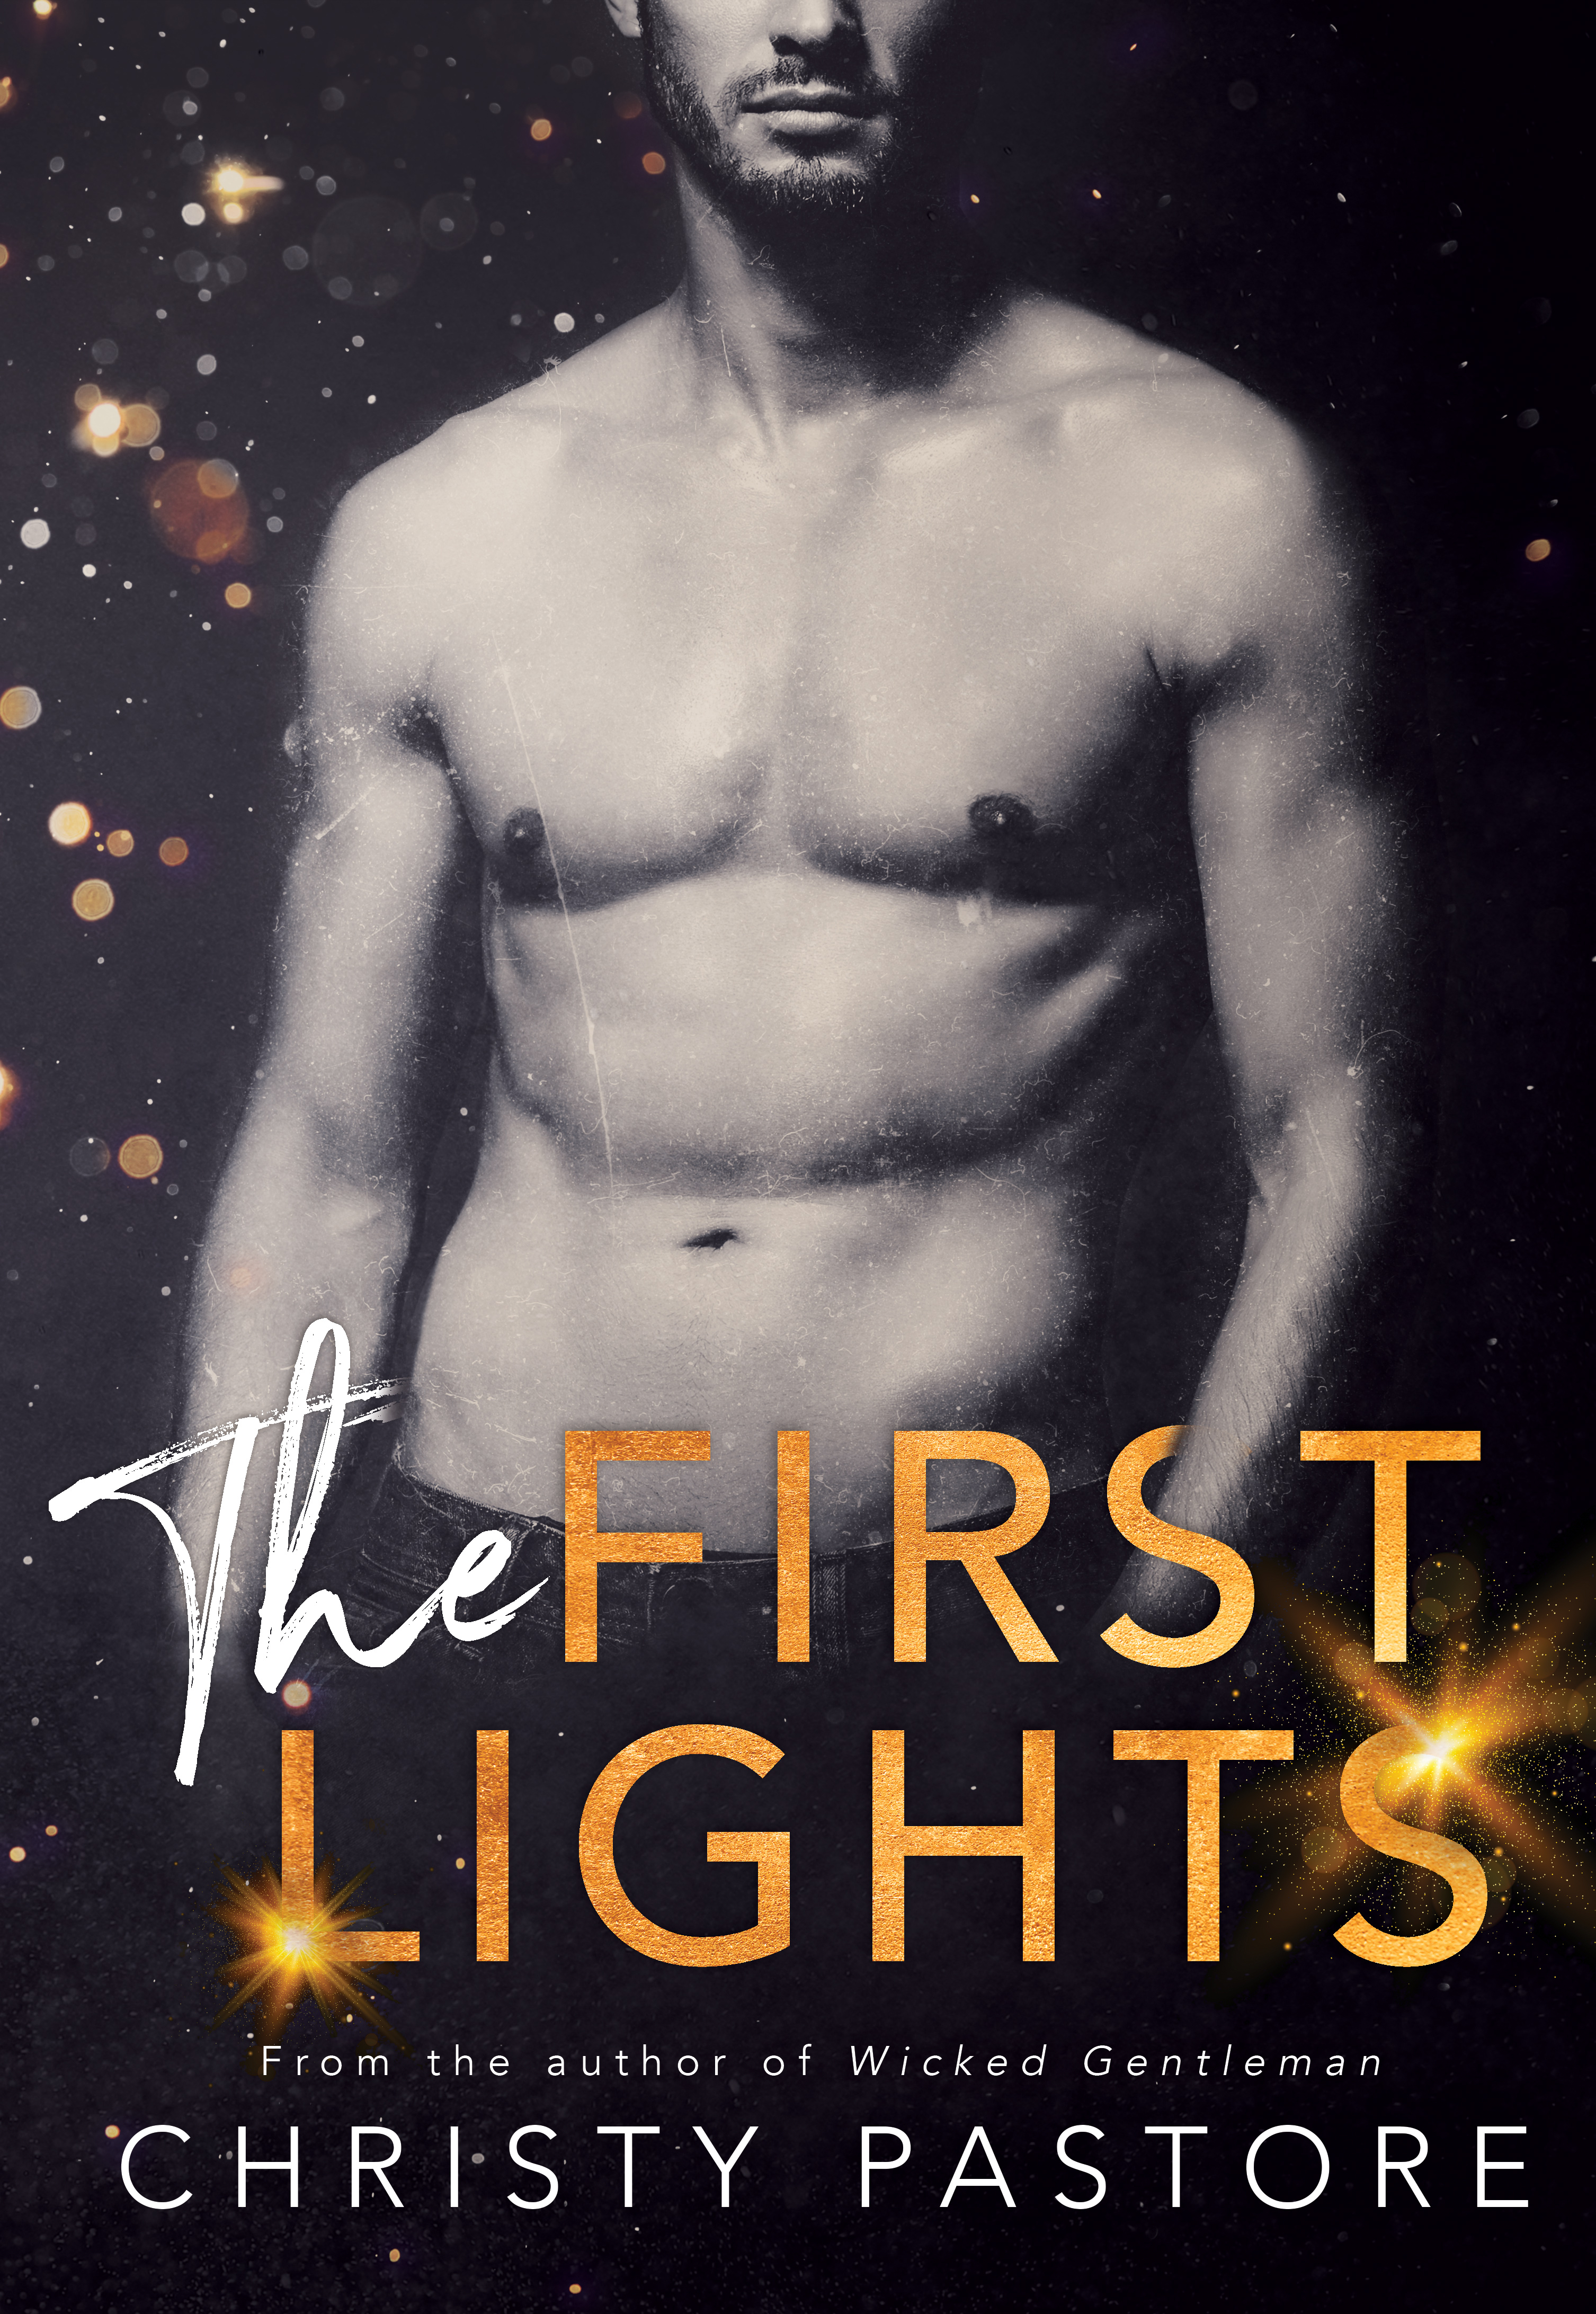 The First Lights by Christy Pastore [Release Blitz]